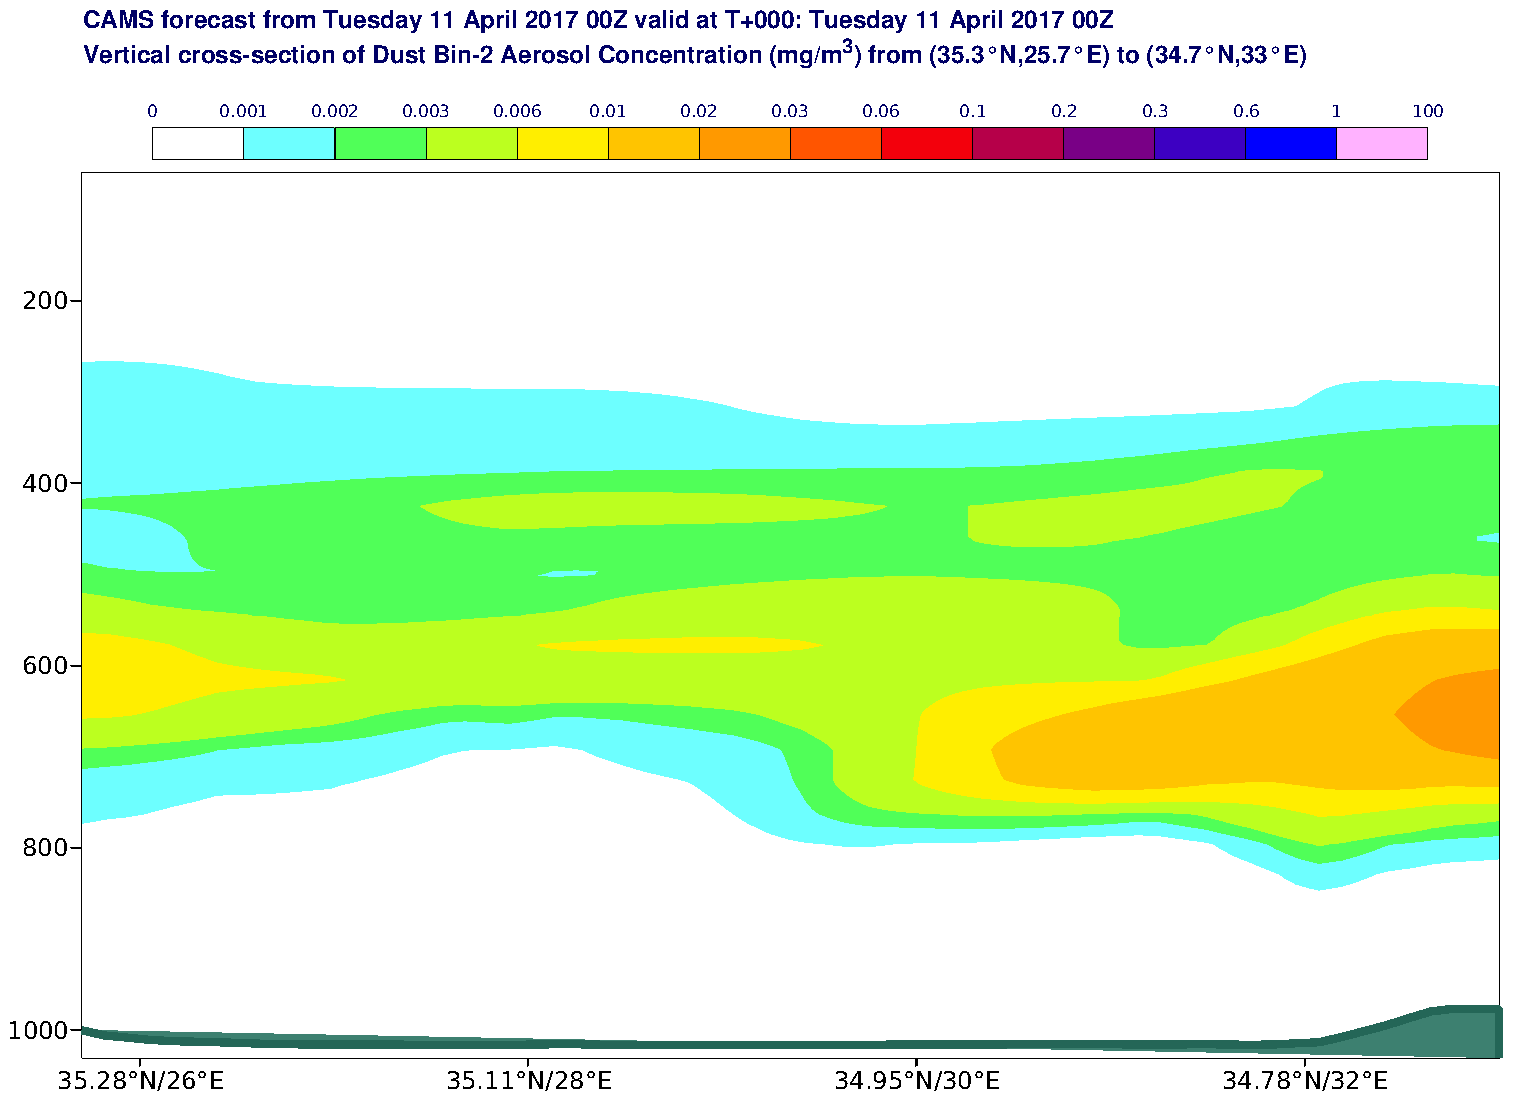 Vertical cross-section of Dust Bin-2 Aerosol Concentration (mg/m3) valid at T0 - 2017-04-11 00:00